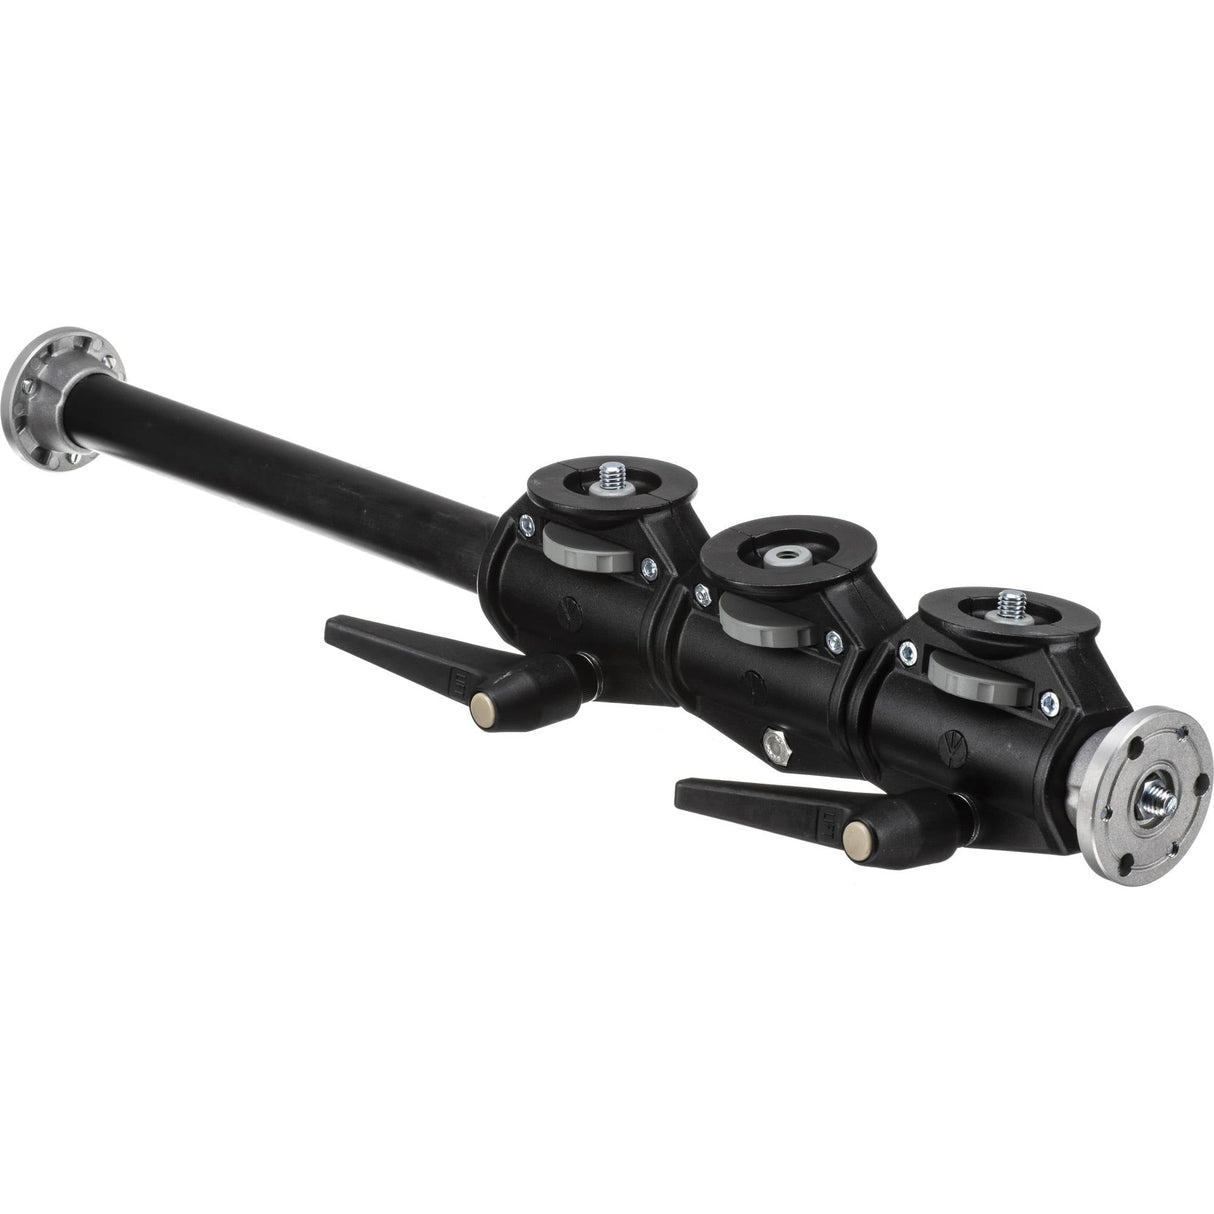 Manfrotto 131DDB Tripod Accessory Arm for Four Heads (Black)